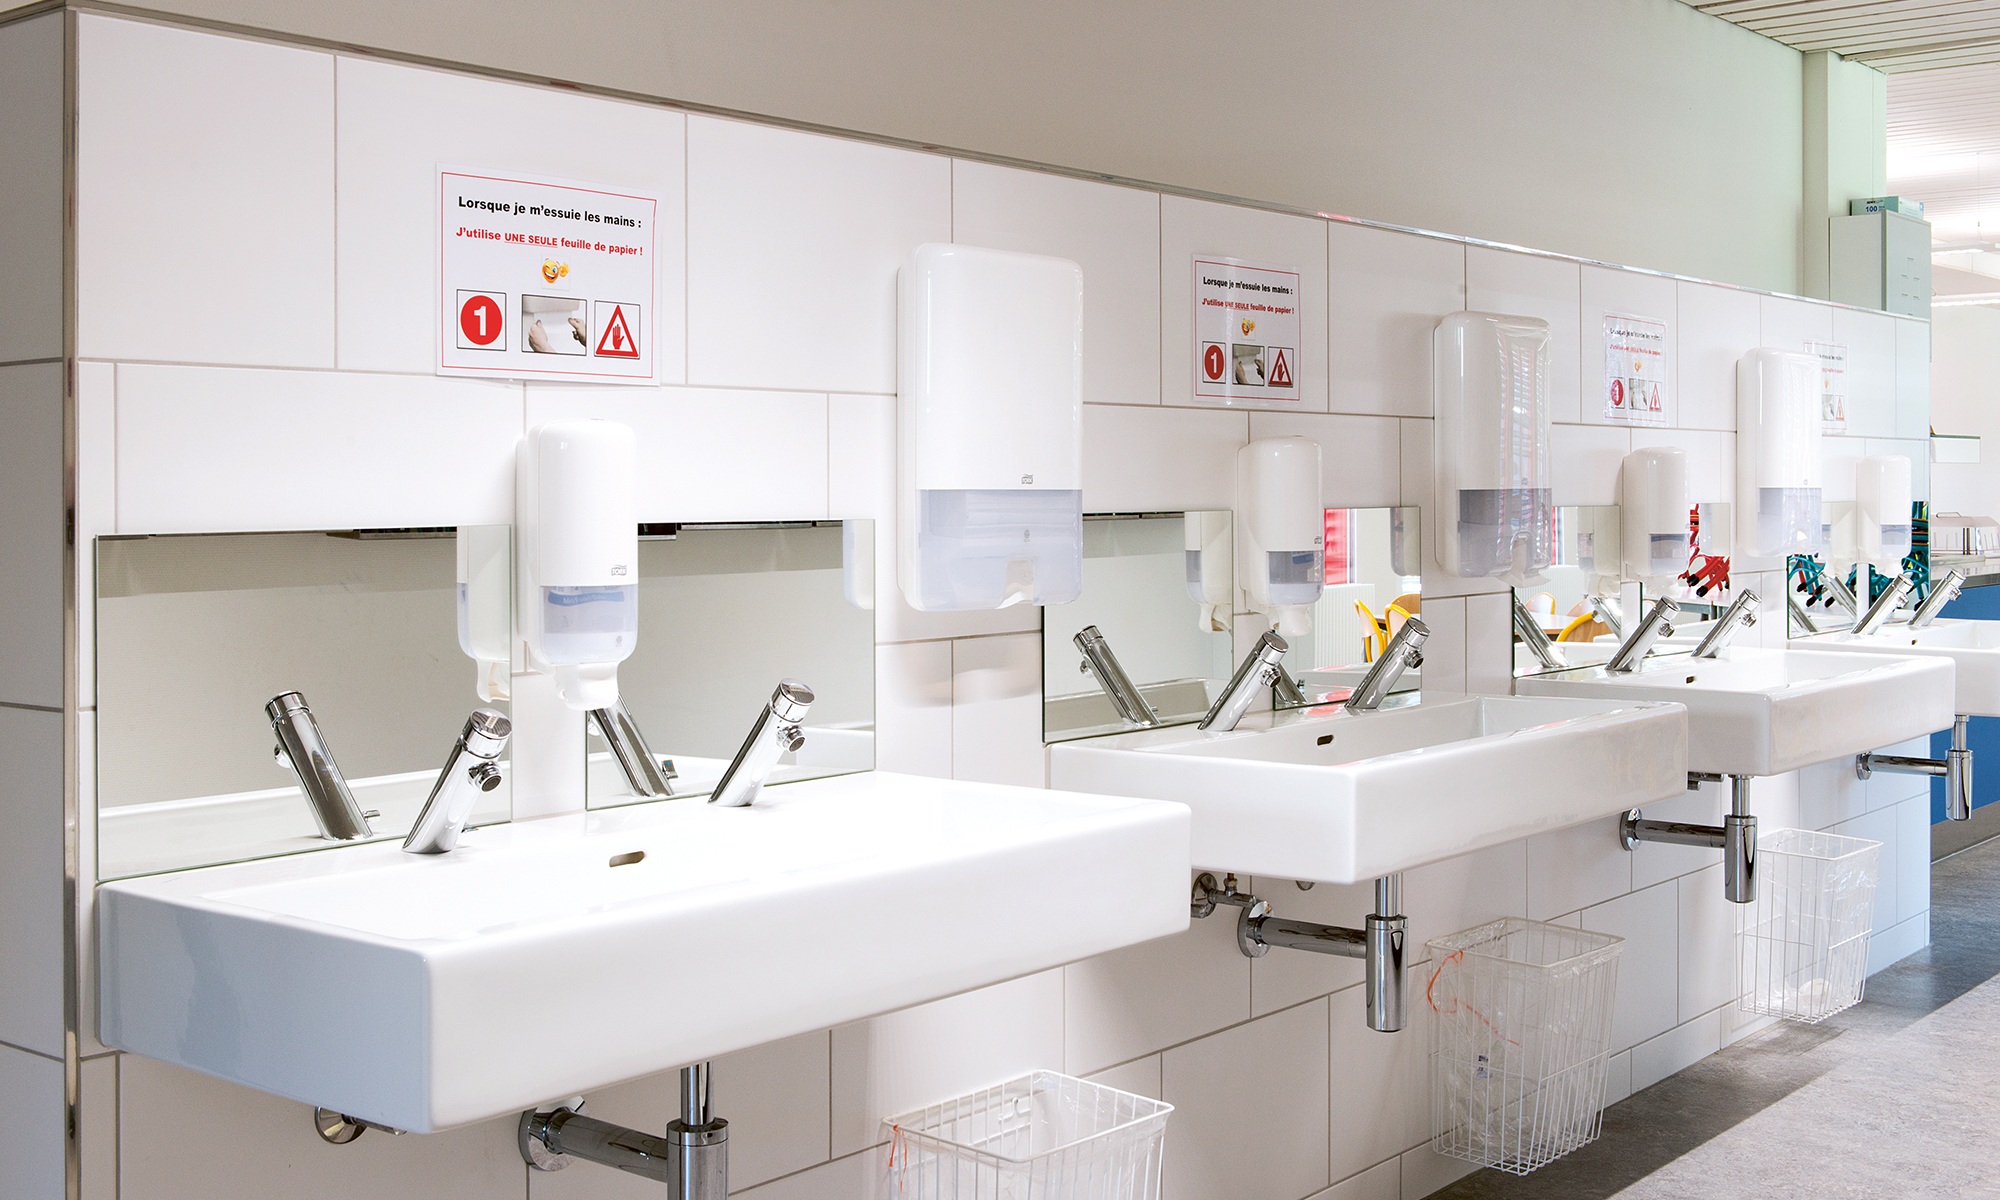 Sanitary facilities in the wet room area